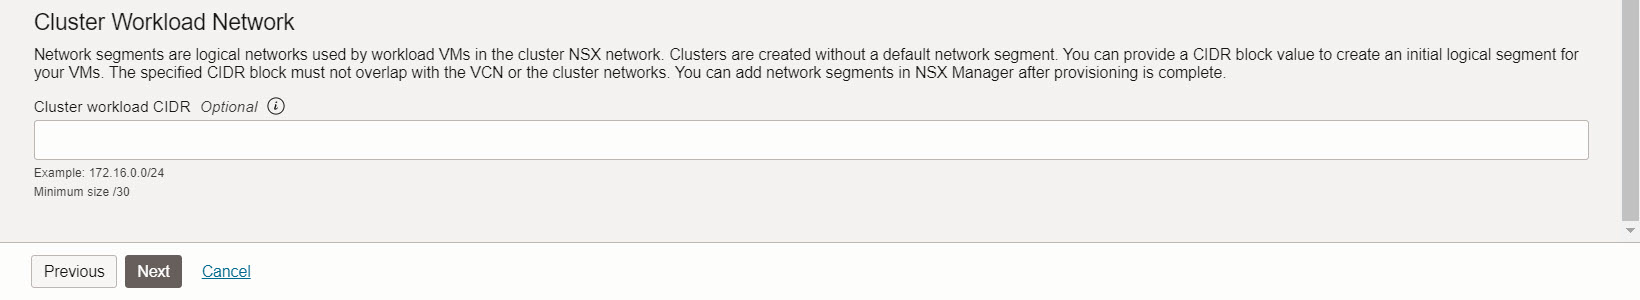 Create Cluster - Networking - Workload Network